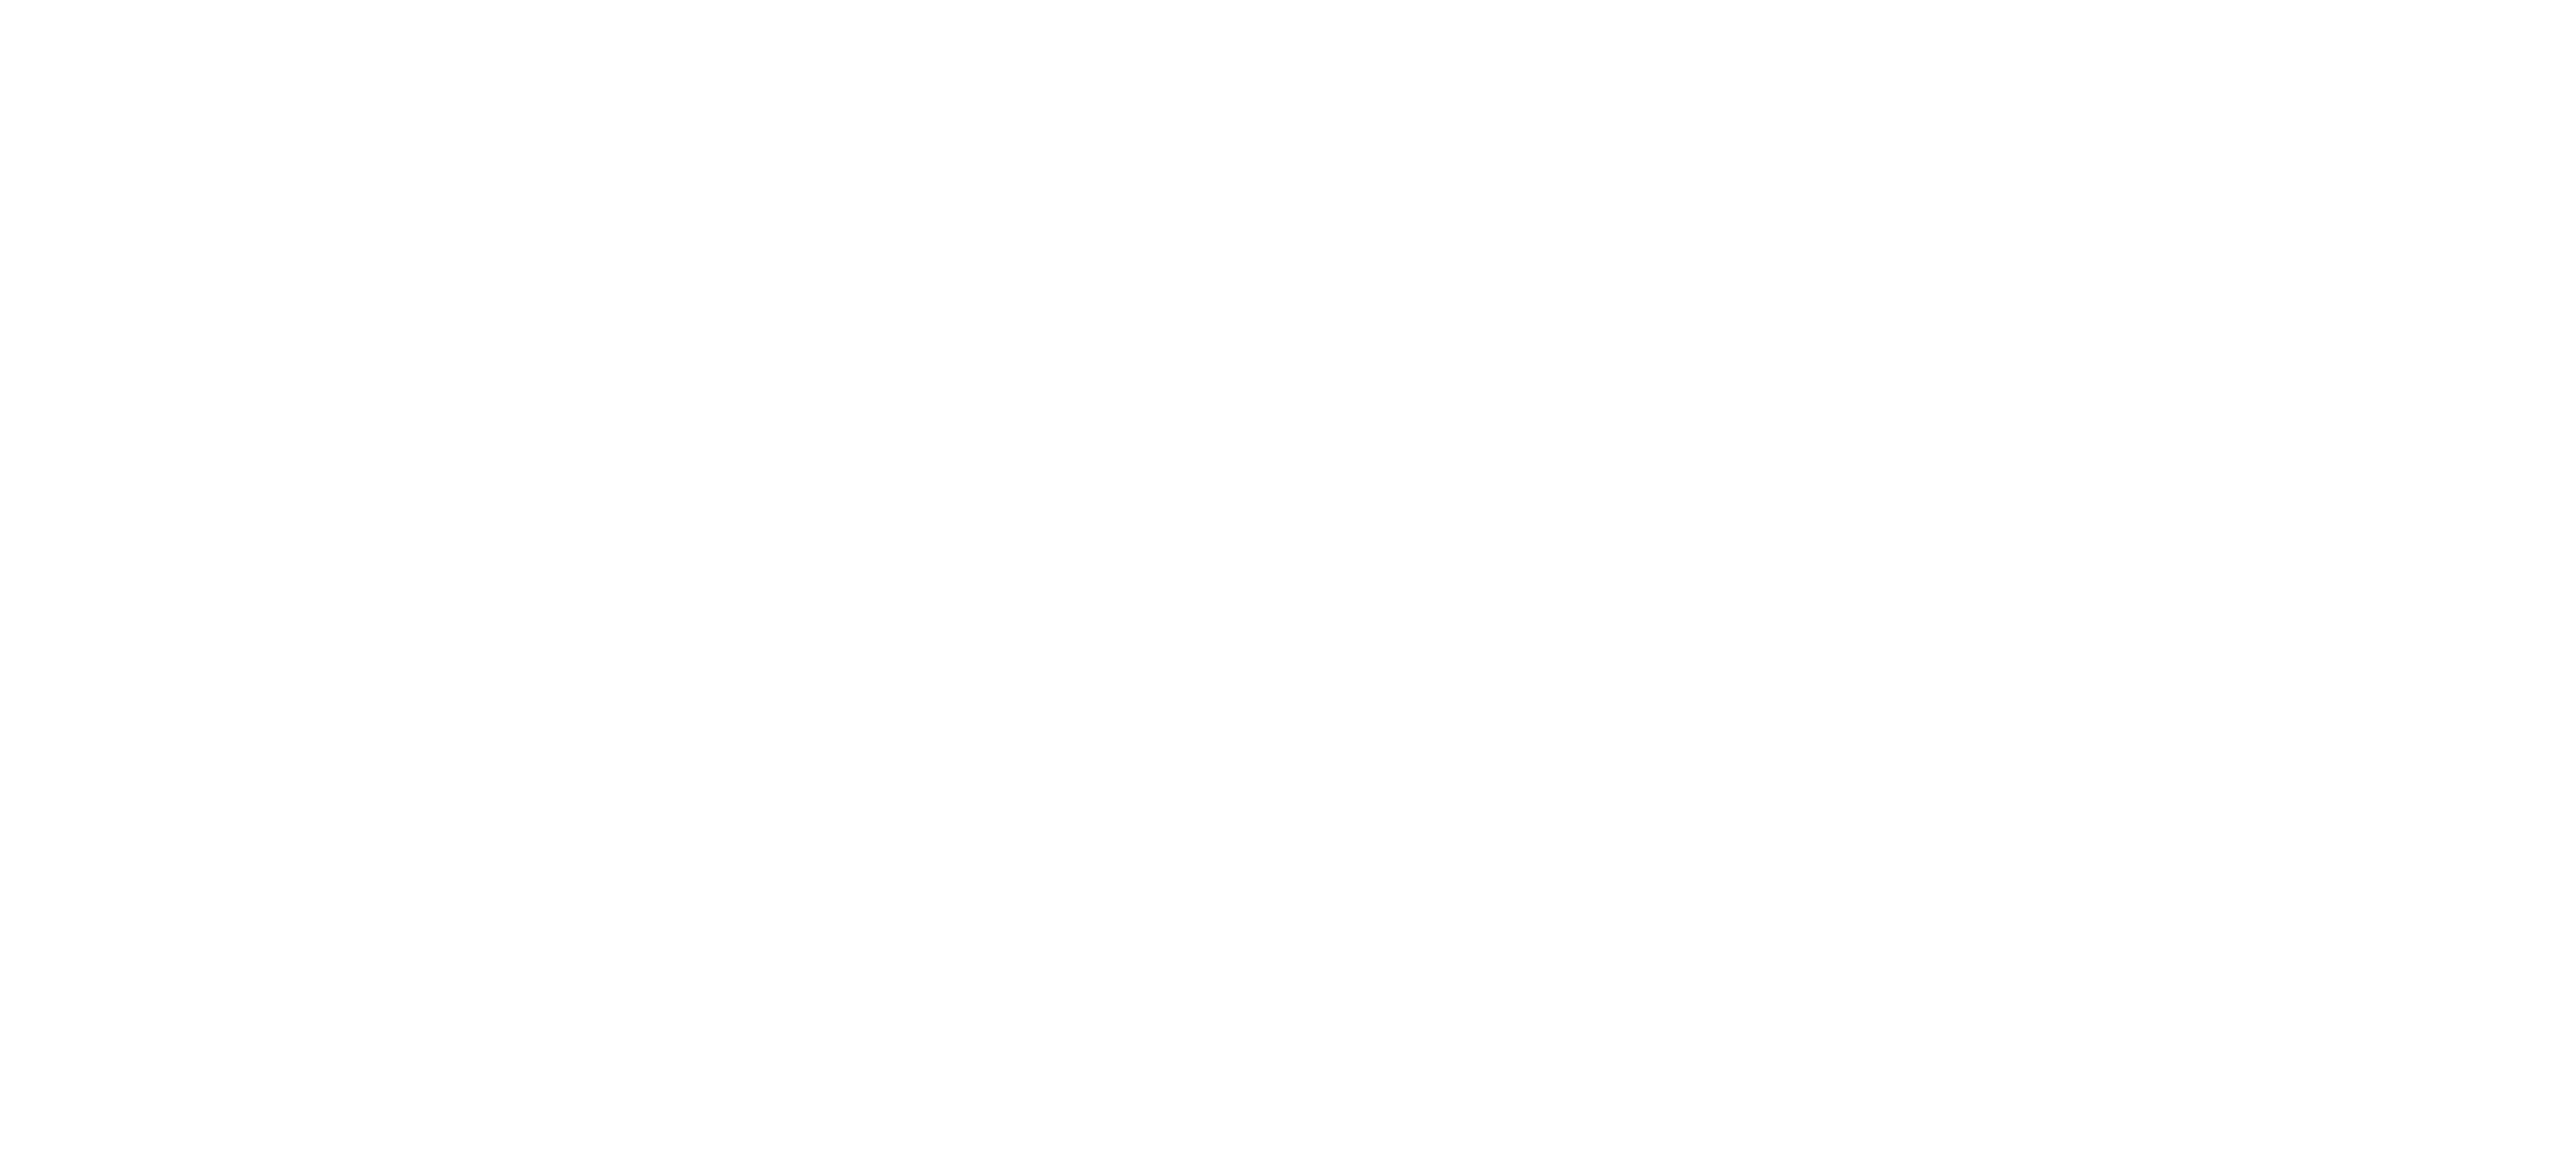 Once Brothers logo